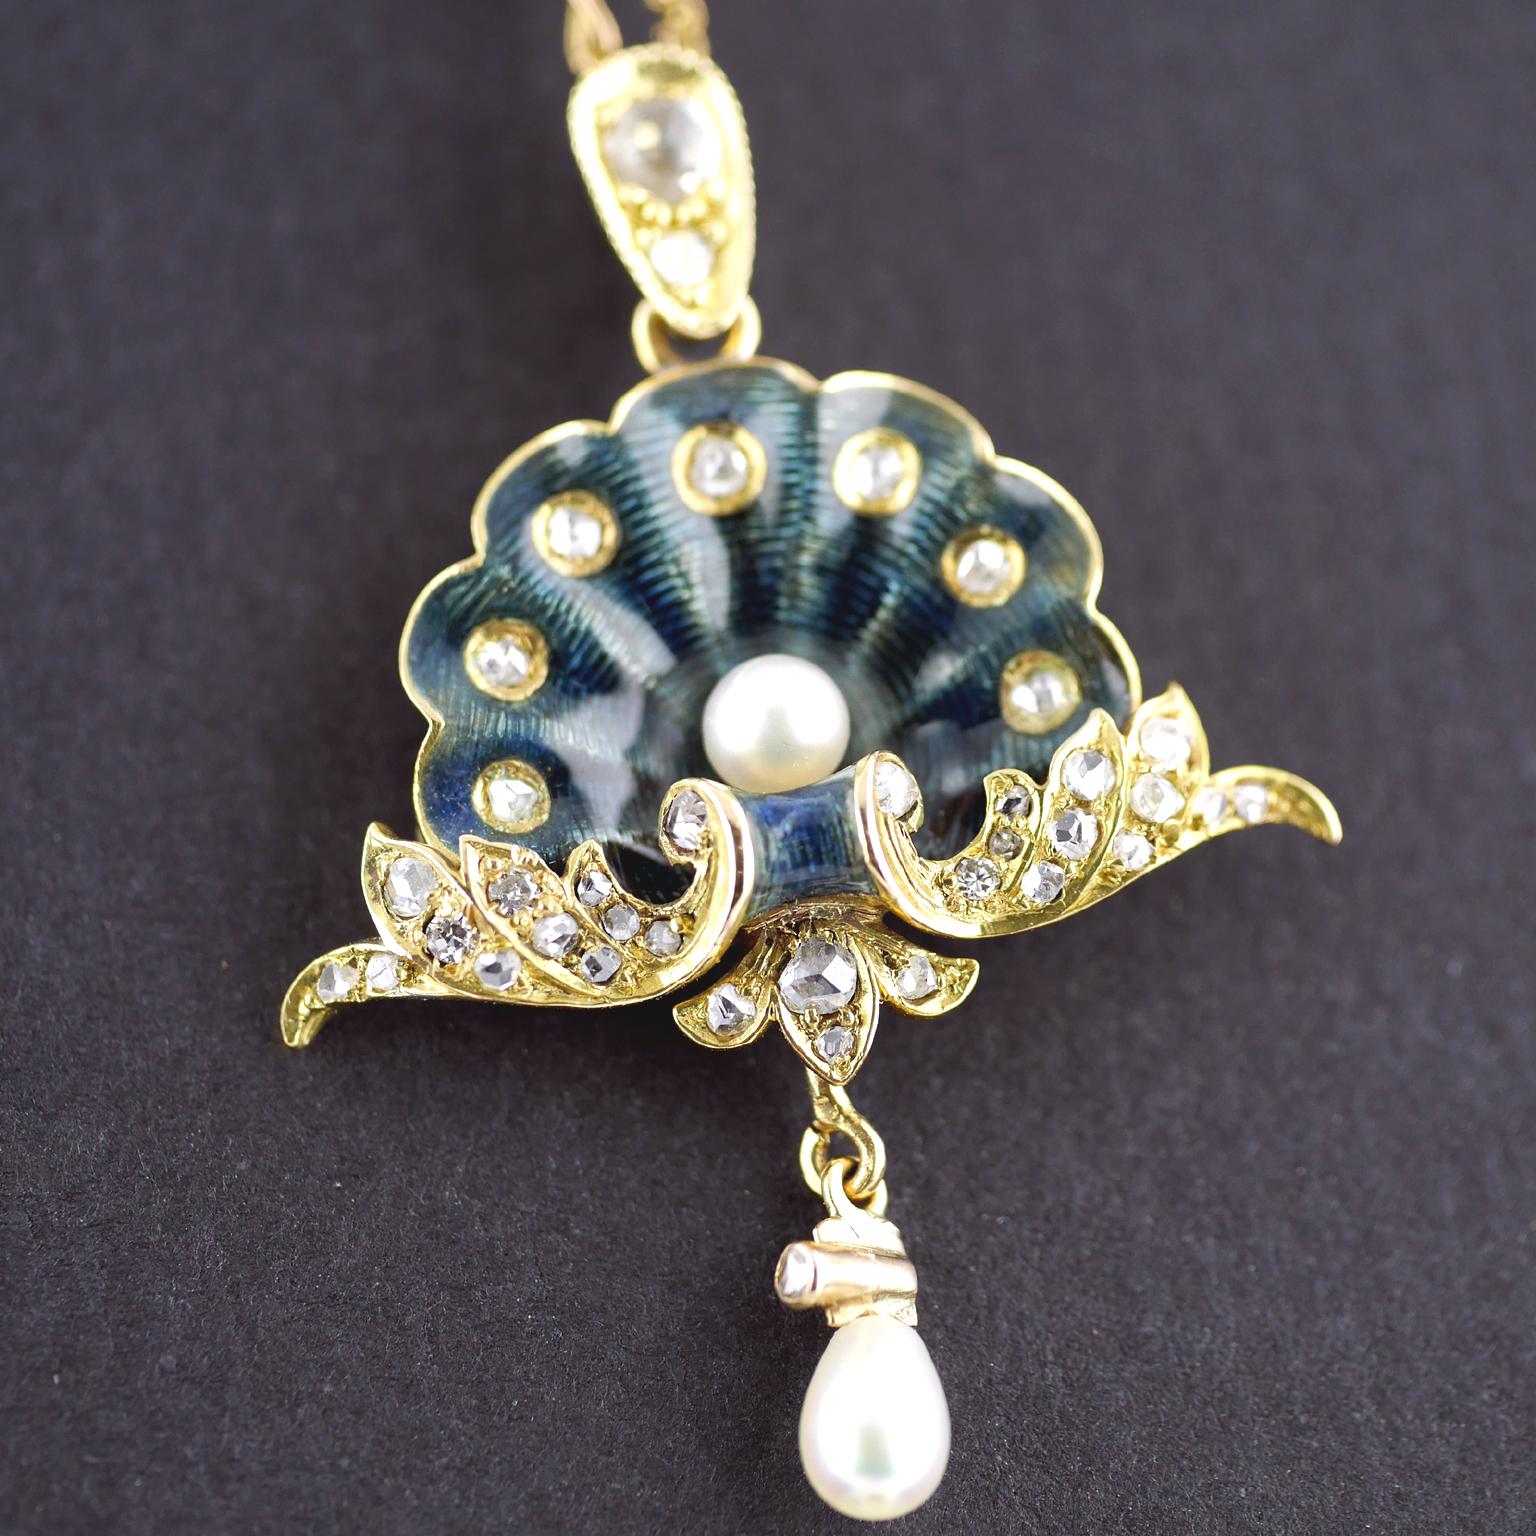 Belle Epoque Pendant in 18 carat gold circa 1900

18 carat gold Oyster shell in Guilloché enamel and diamond set, with natural salt water pearls.

Guilloché is a technique where metal is decorated with a pattern of engravings, mechanically by engine